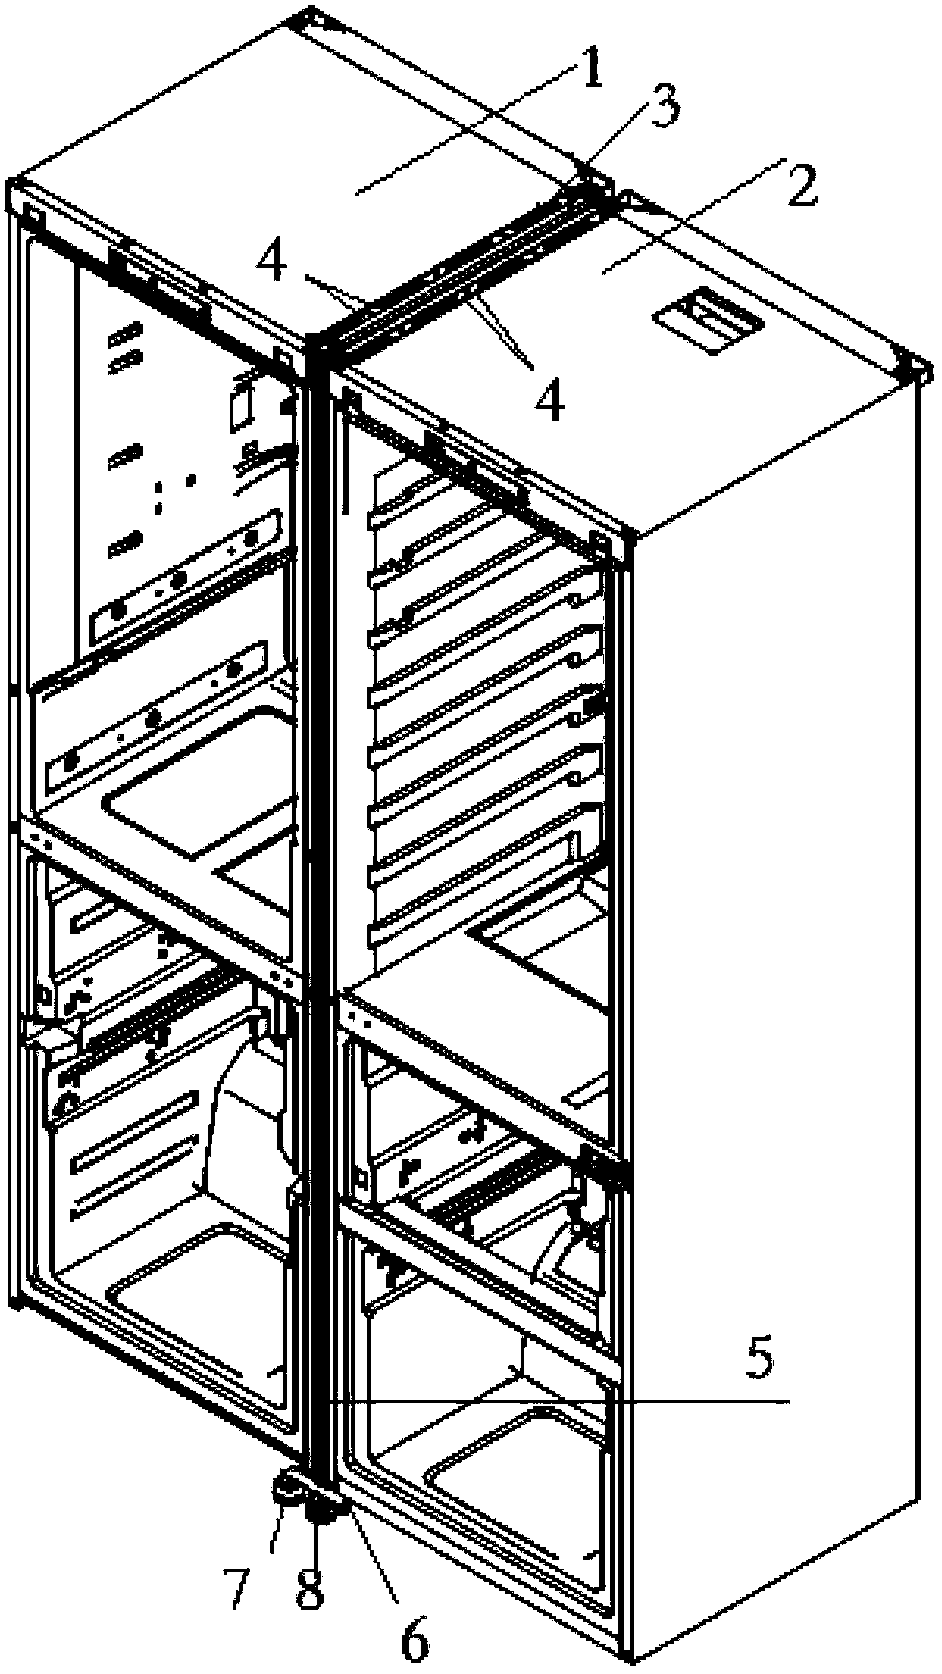 Connection assembly between bodies of refrigerator